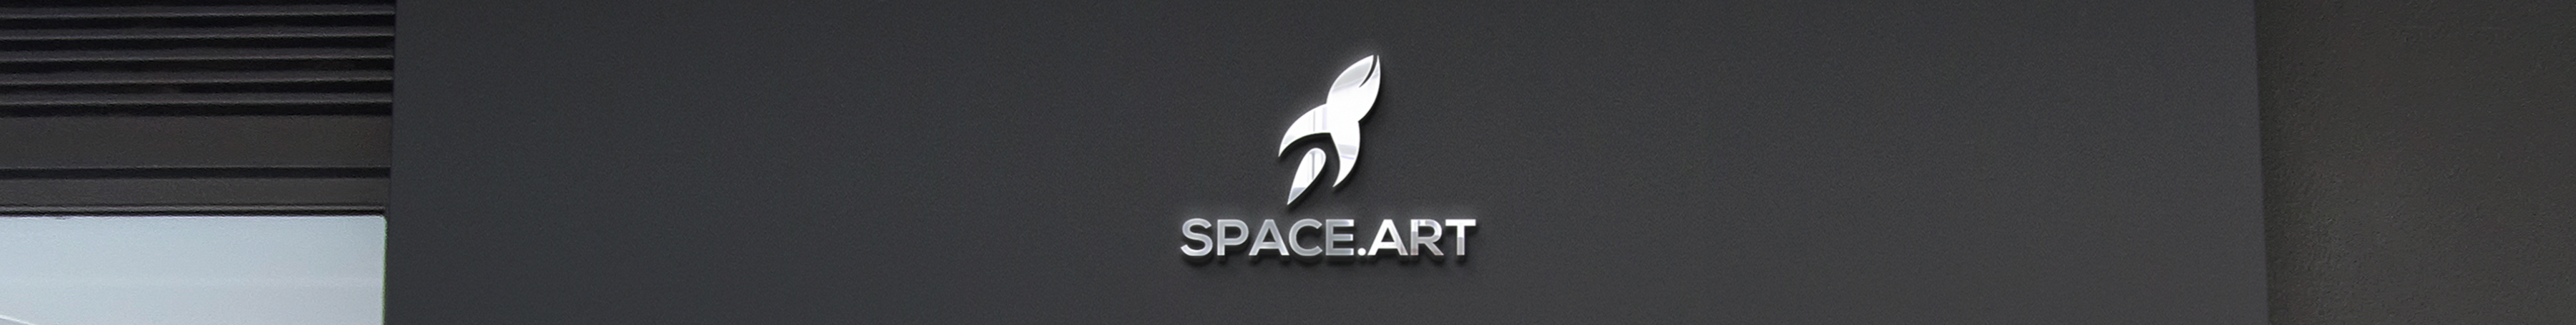 Space Arts profilbanner